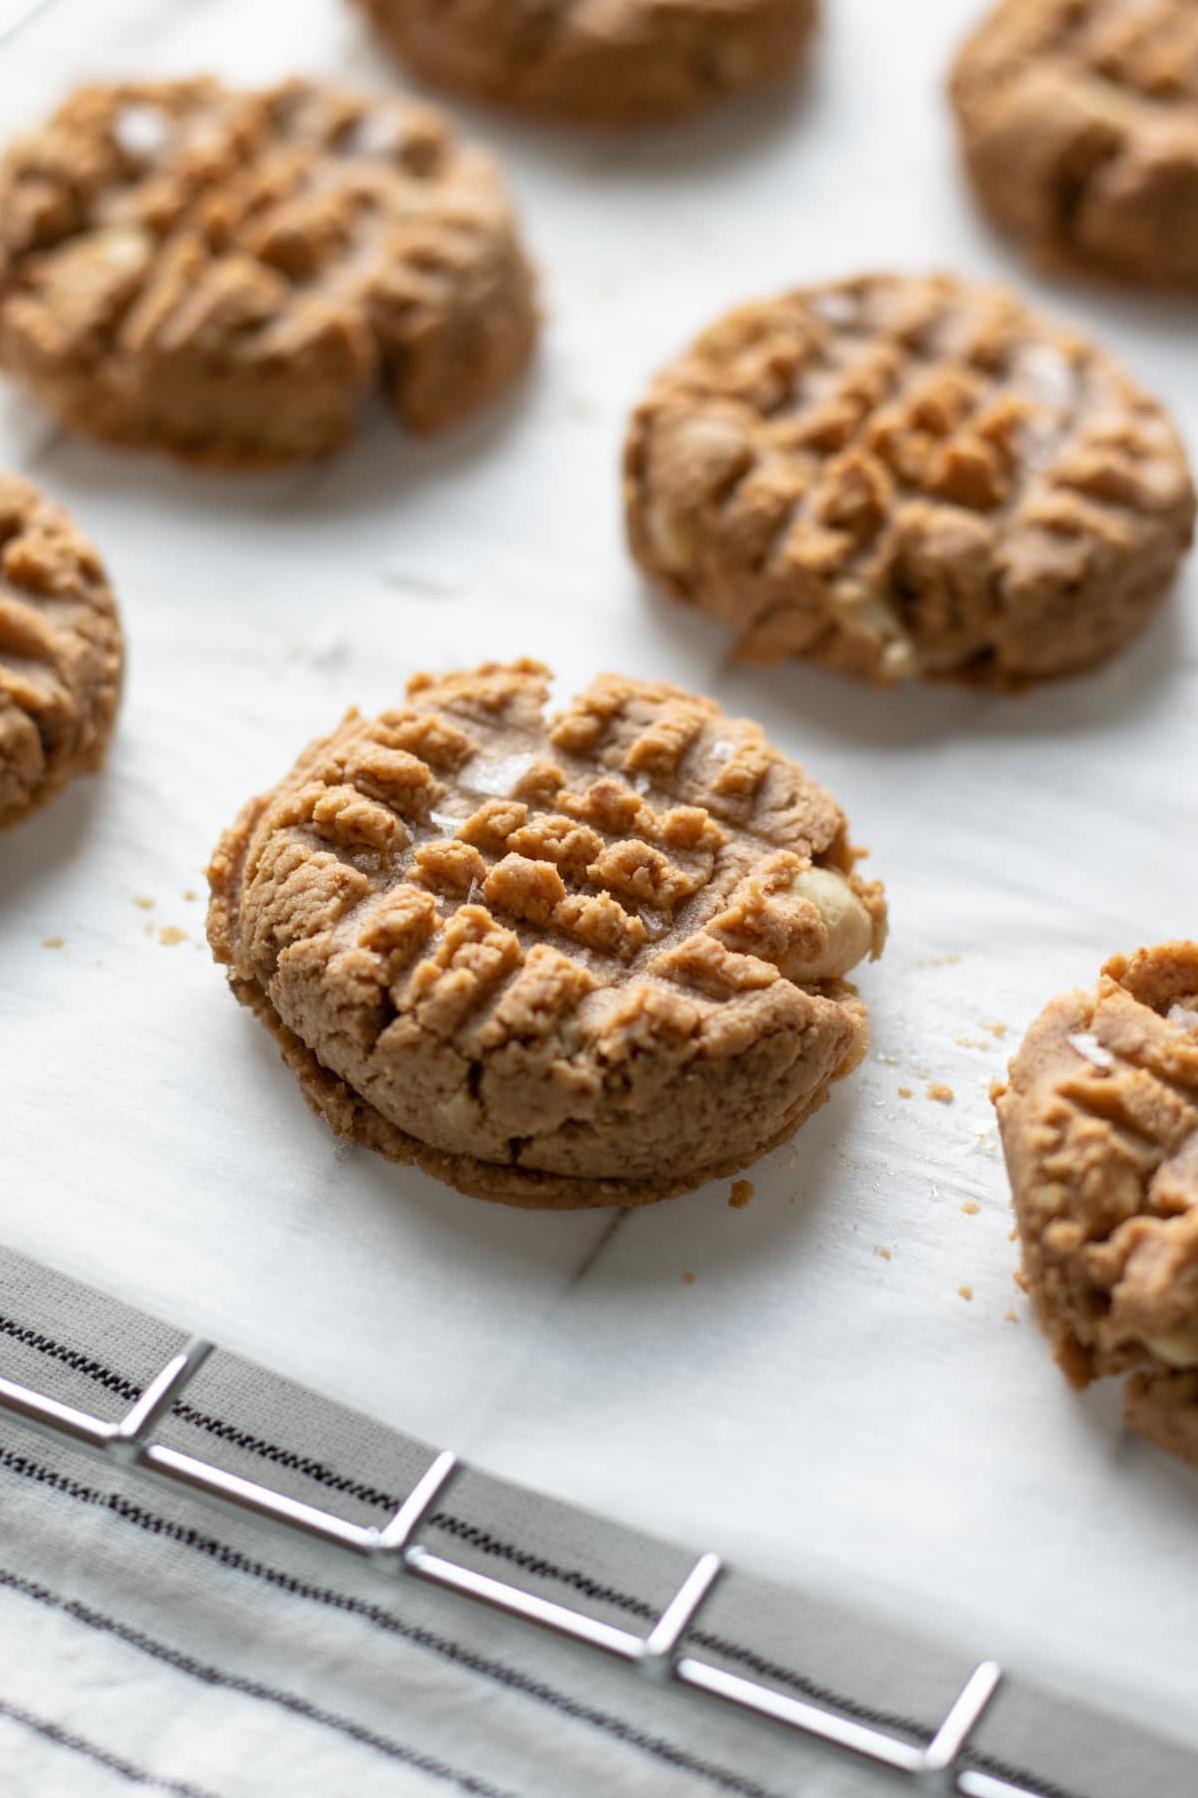  These cookies are perfect for anyone with a dairy intolerance.